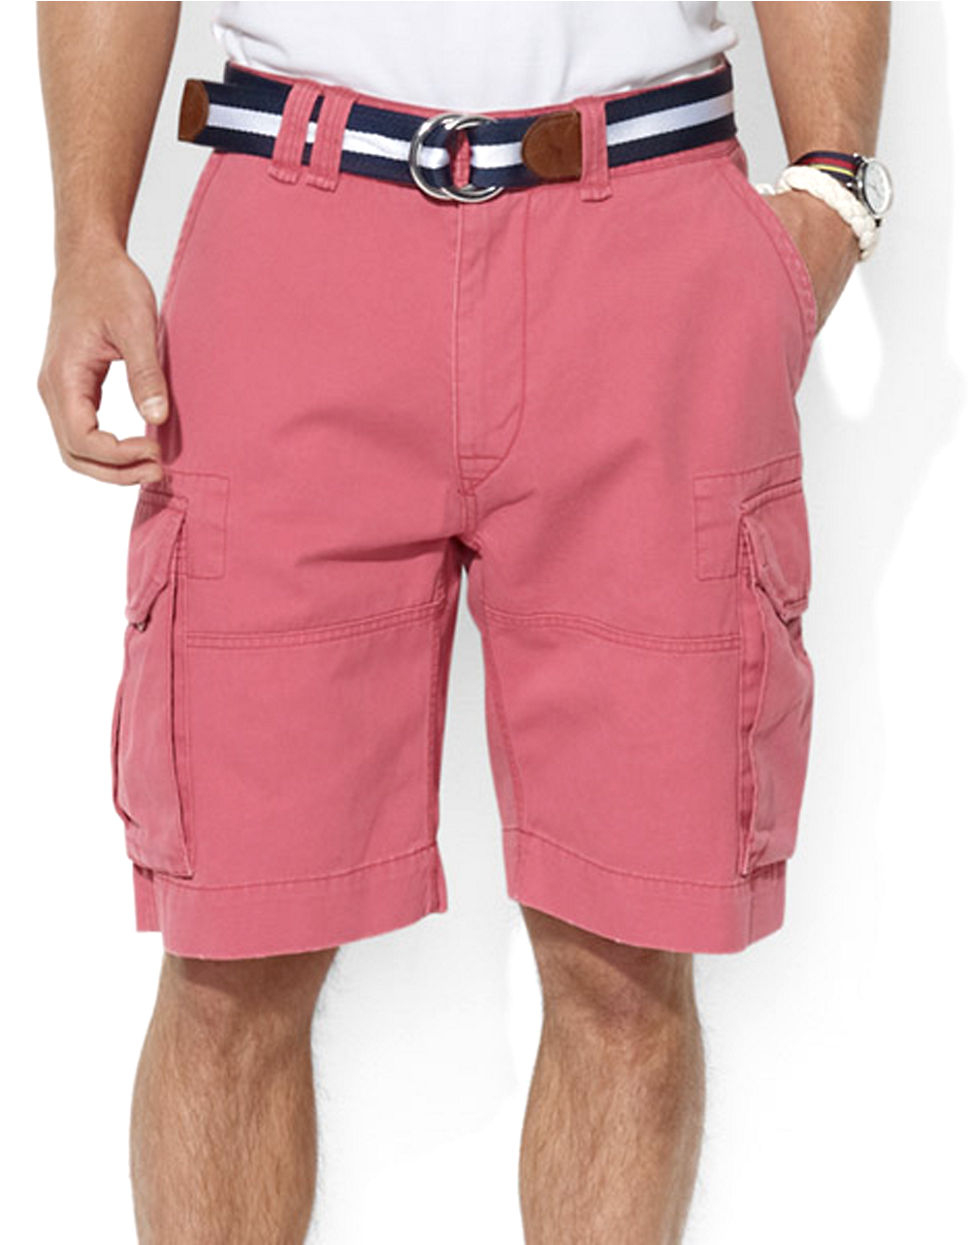 Polo ralph lauren New Gellar Fatigue Vintage Chino Shorts in Pink for ...